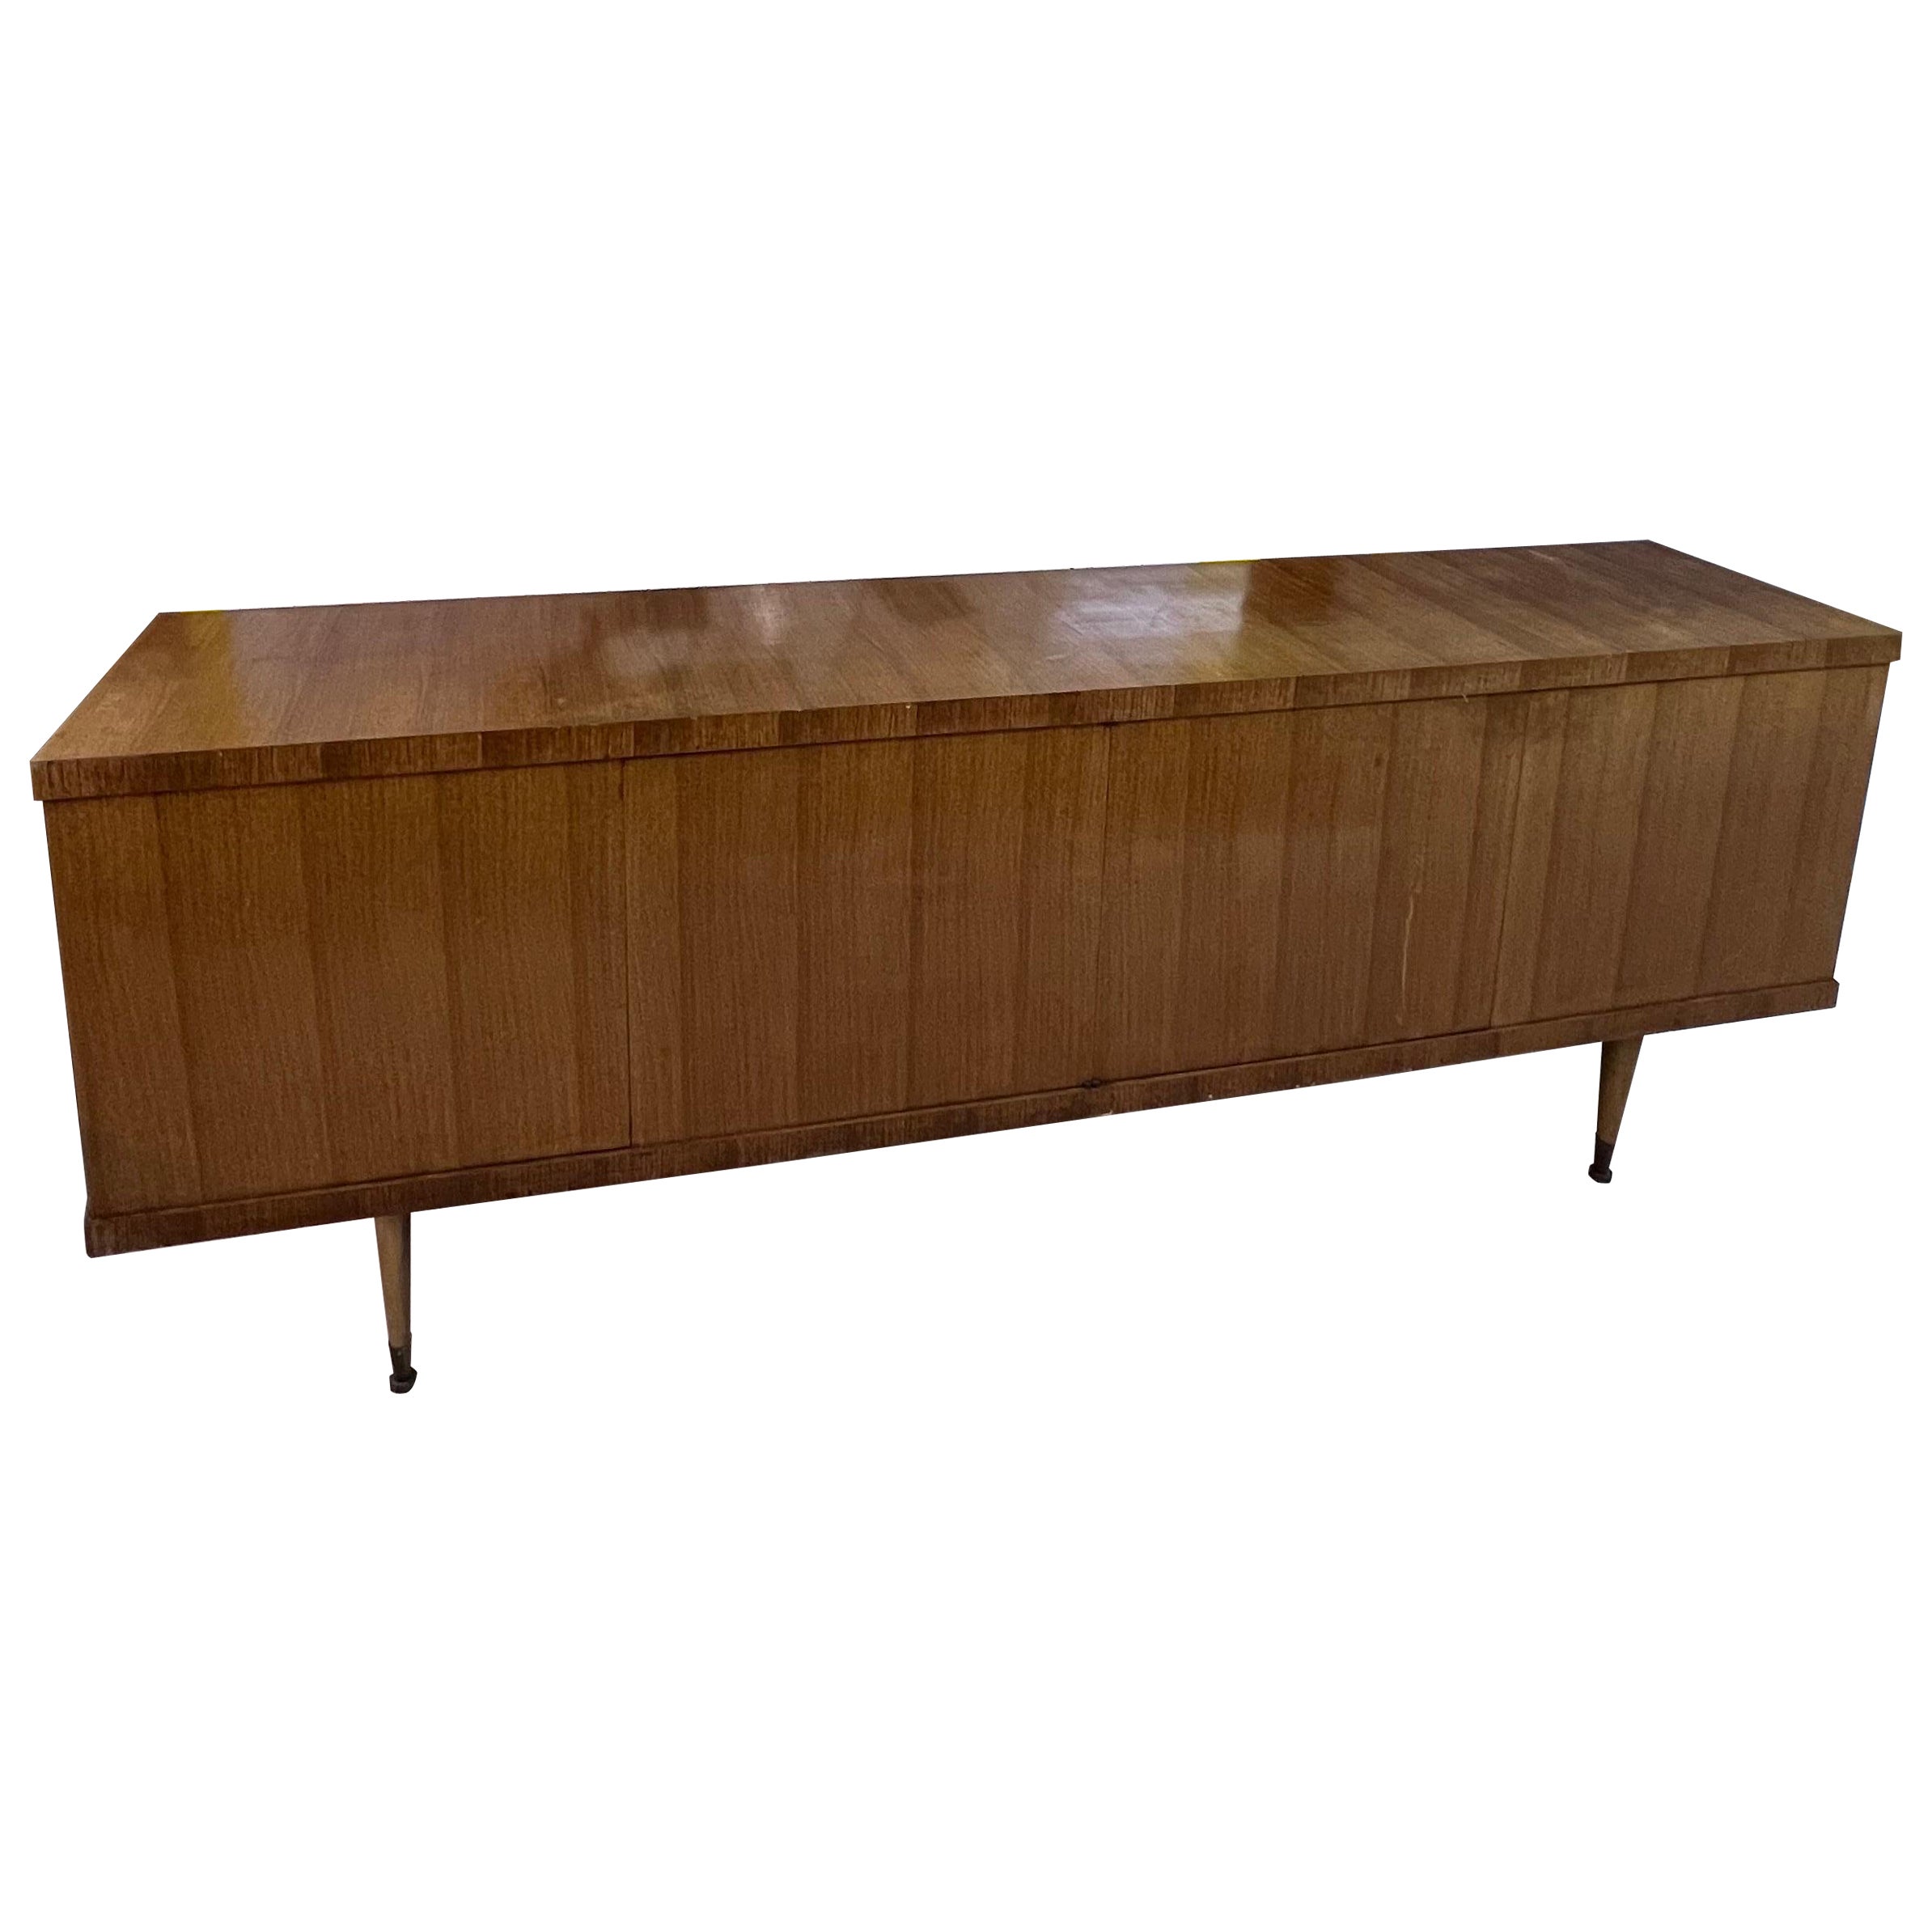 French Sideboard by Guermonprez, Edited by Magnani